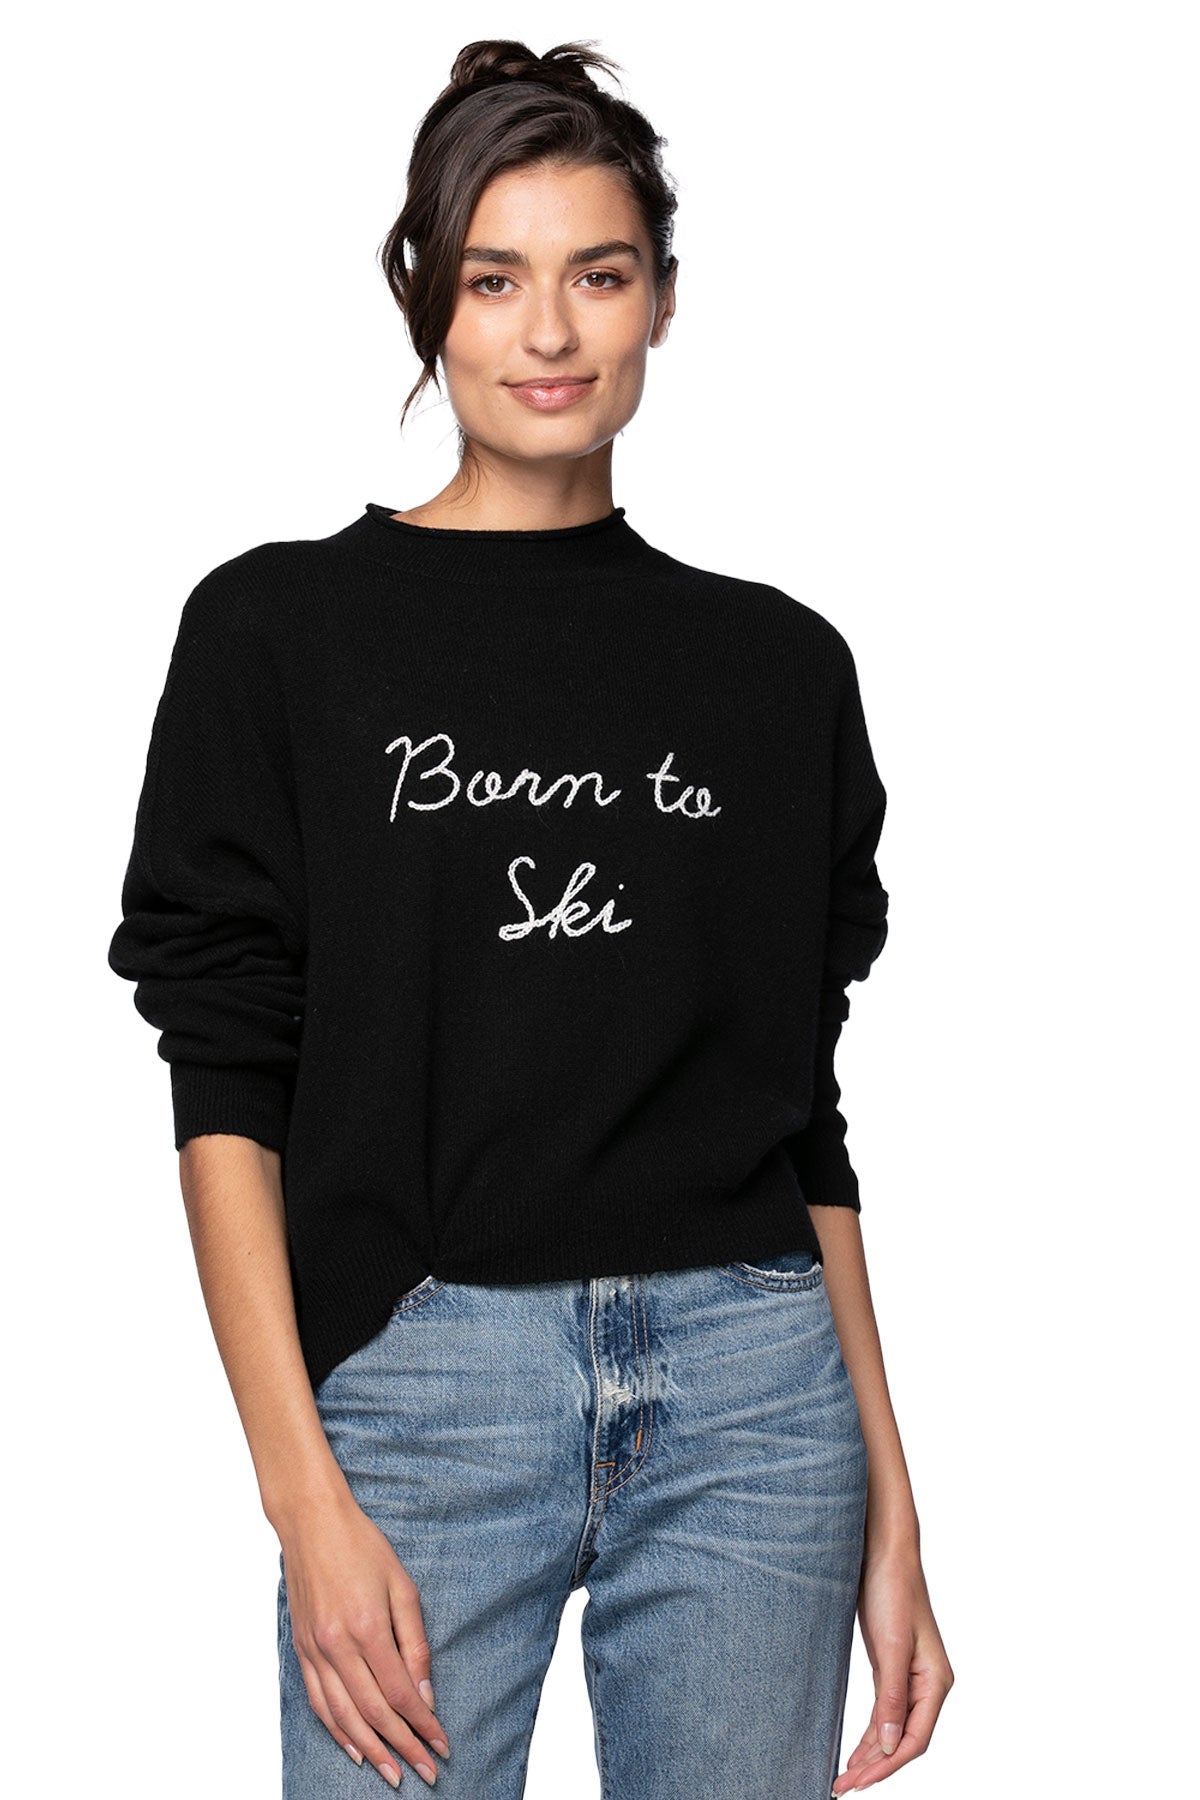 Model wearing Golden Sun Born to ski cashmere funnel neck sweater wearing jeans on a white background